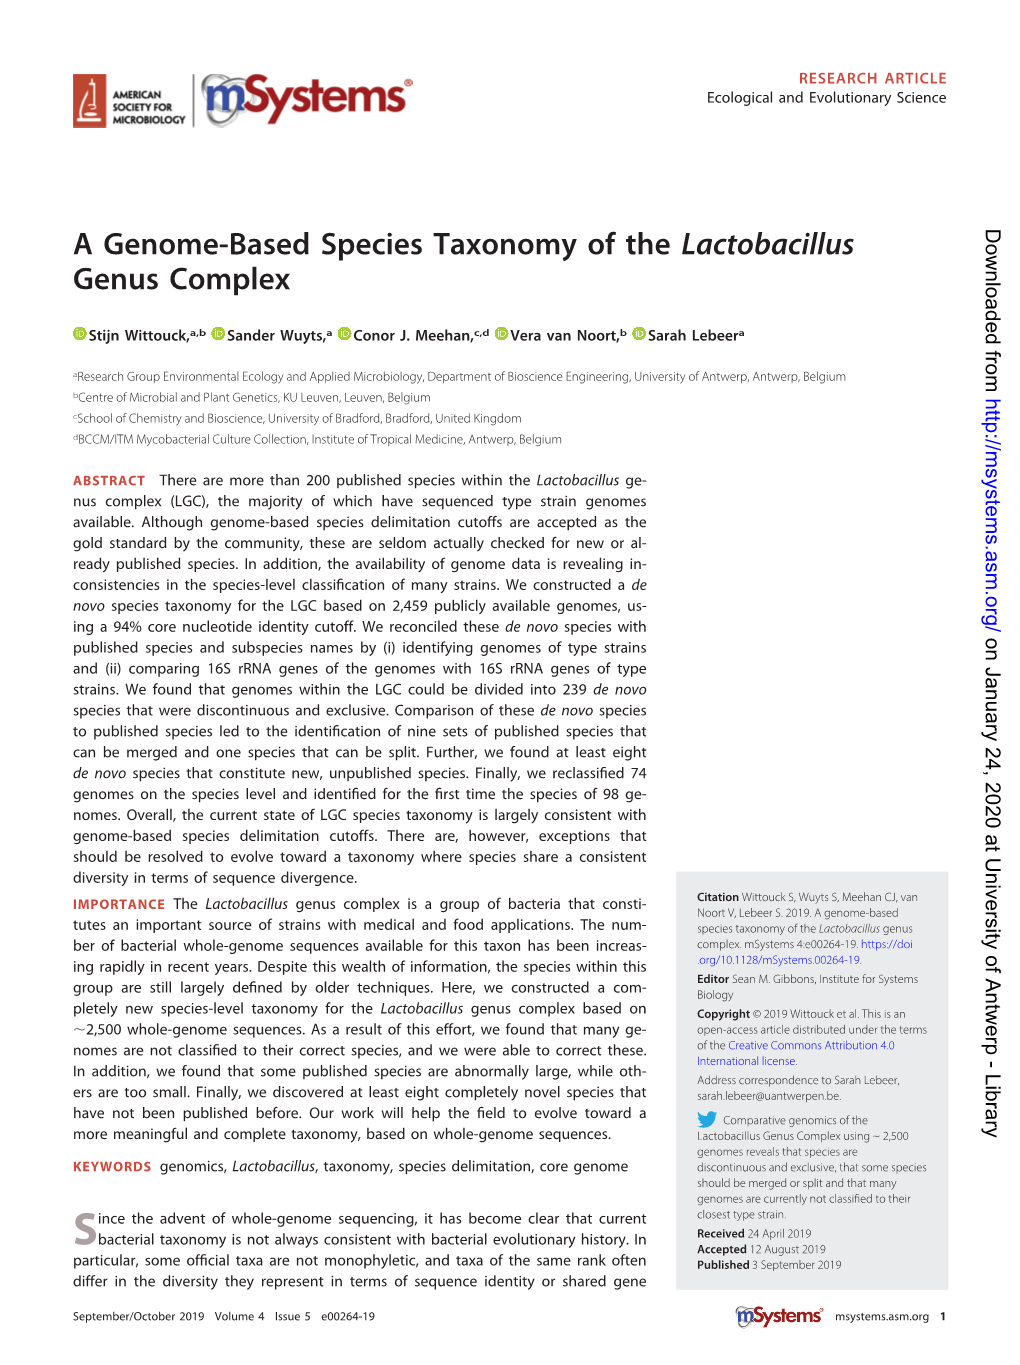 A Genome-Based Species Taxonomy of the Lactobacillus Genus Complex